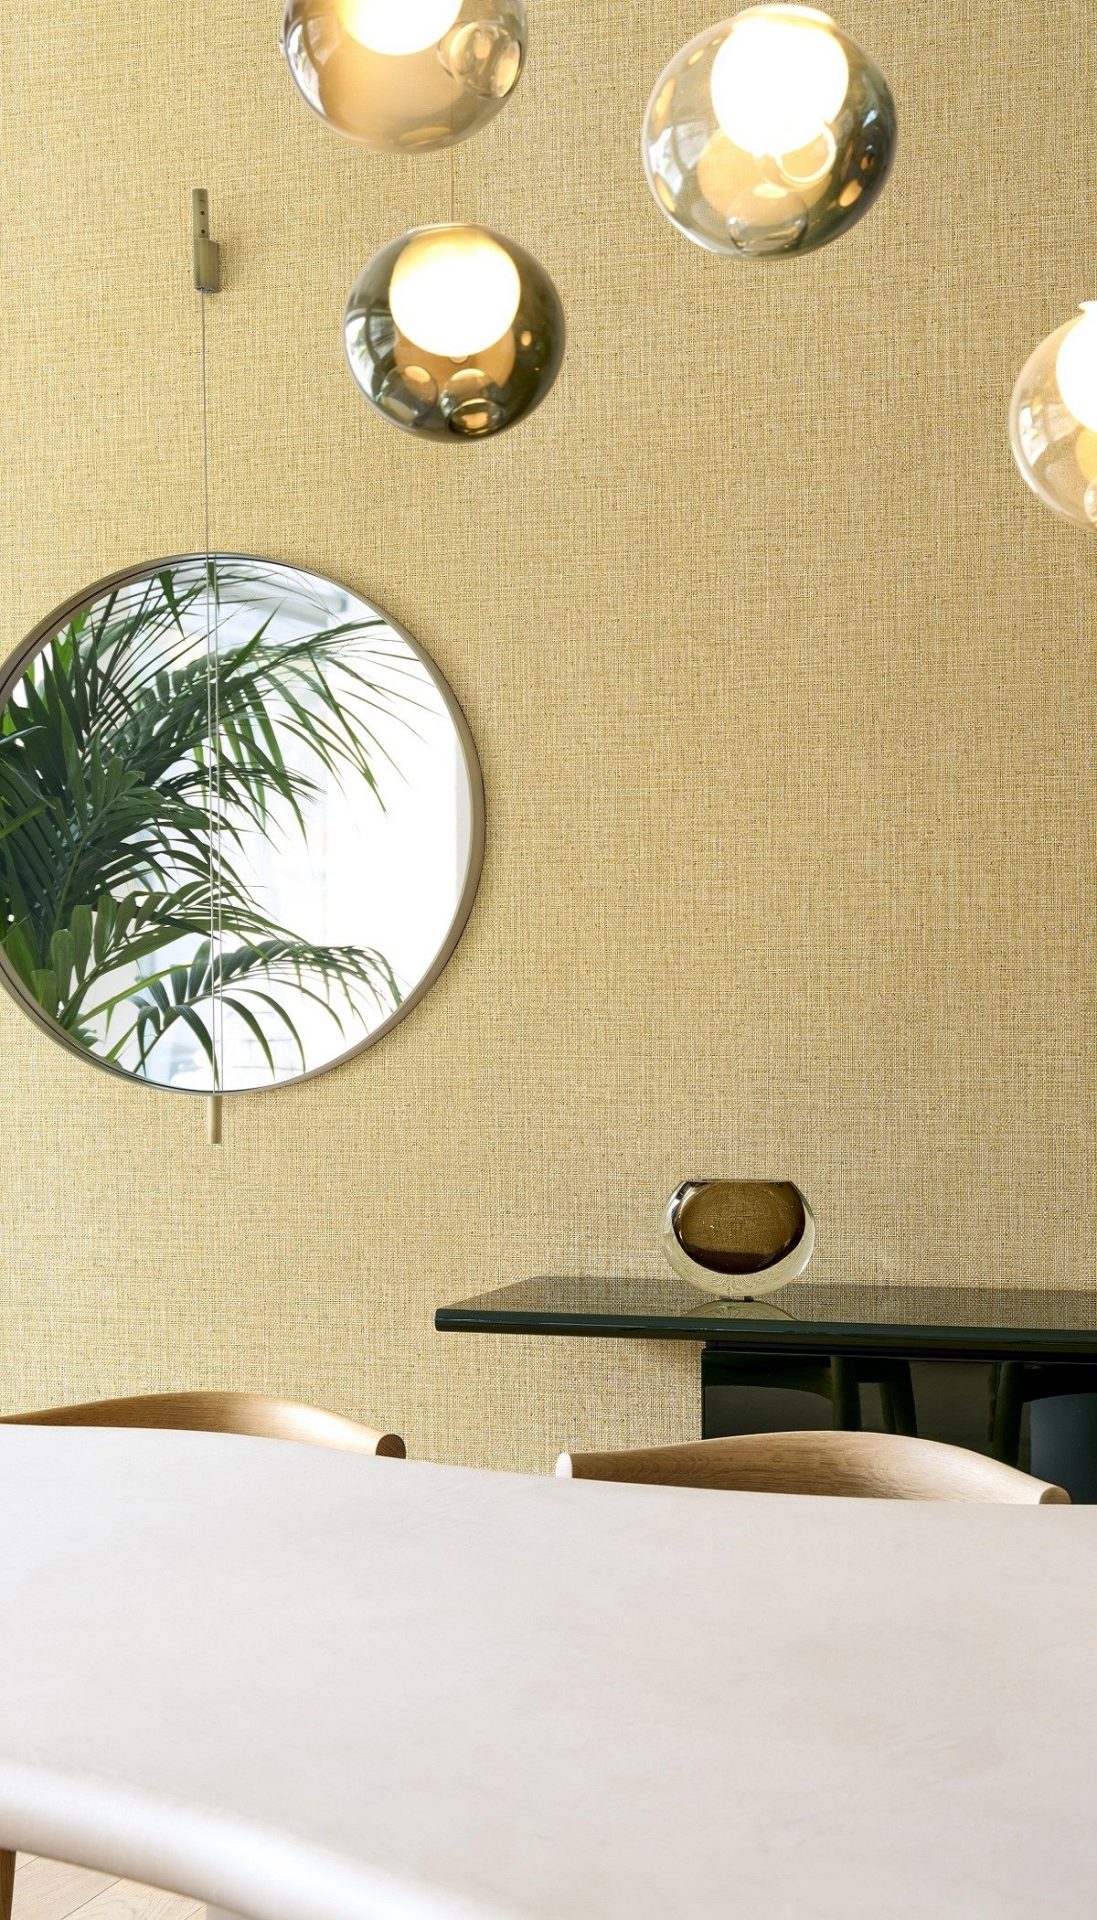 roomset with Nongo wallcovering in natural colour and texture